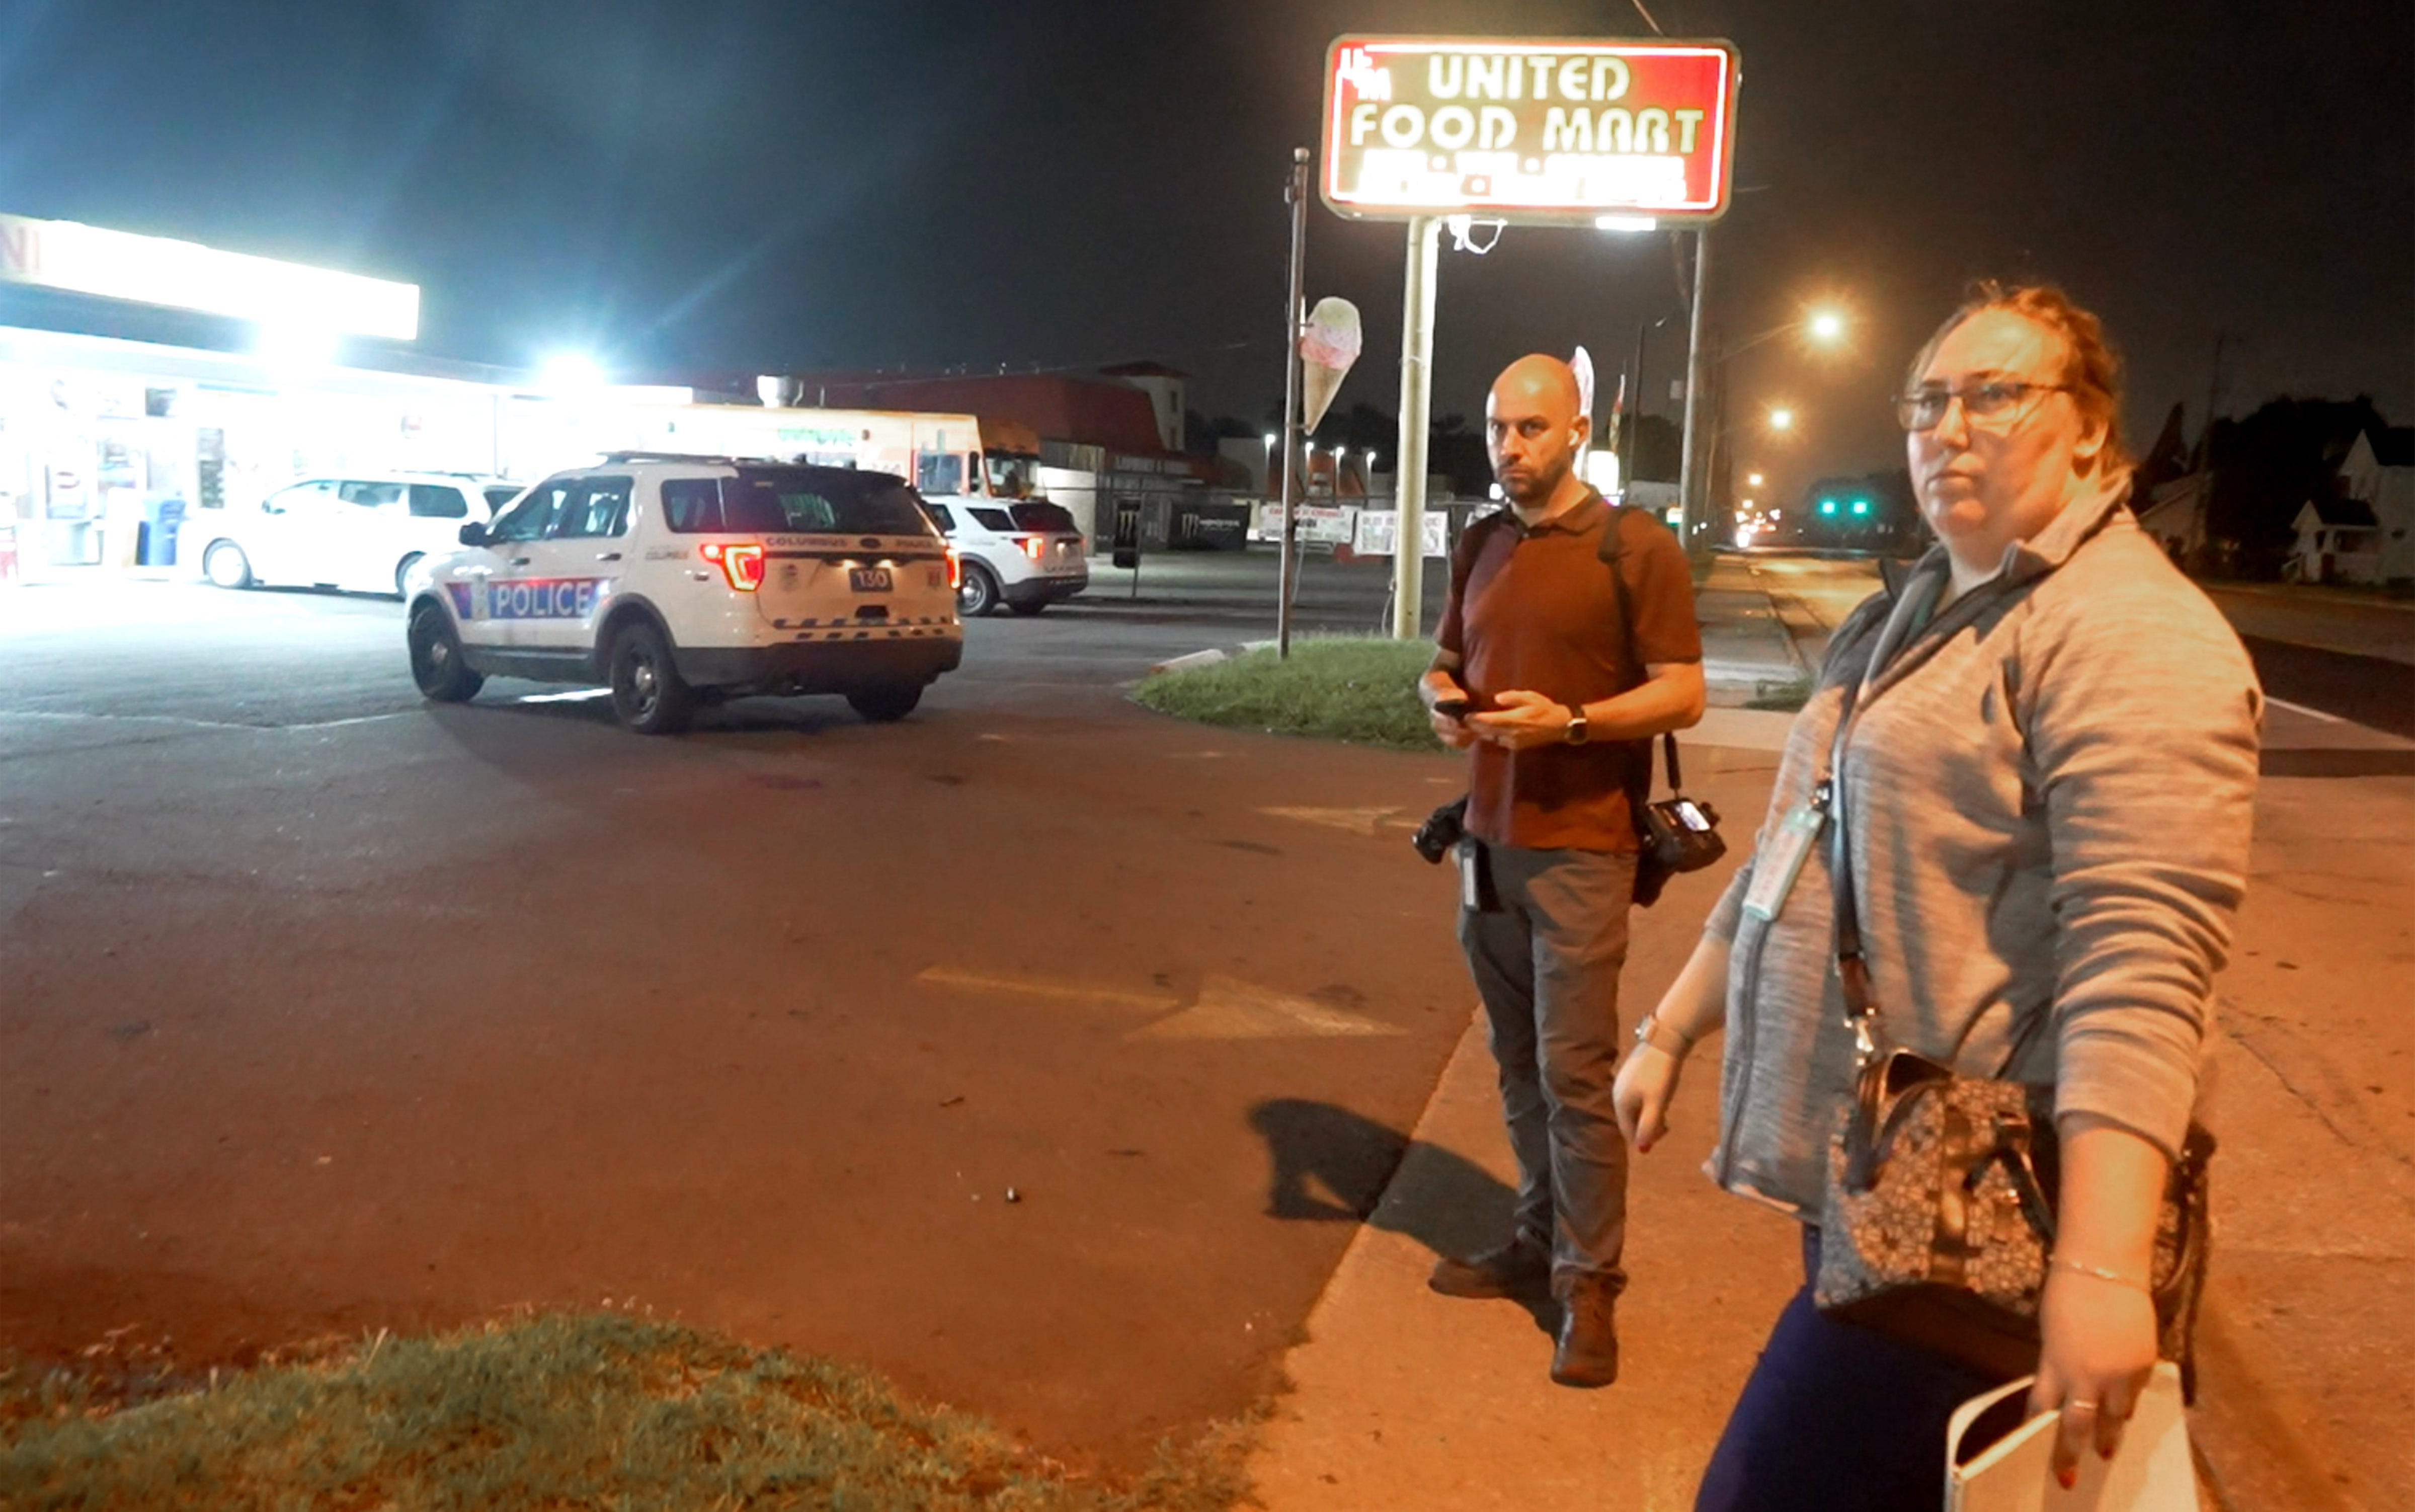 July 20, 2023 Columbus, Ohio, USA; At about 3 am Columbus Dispatch photographer Adam Cairns and reporter Bethany Bruner watch police investigate an armed robbery at the United Food Mart on S. High St.